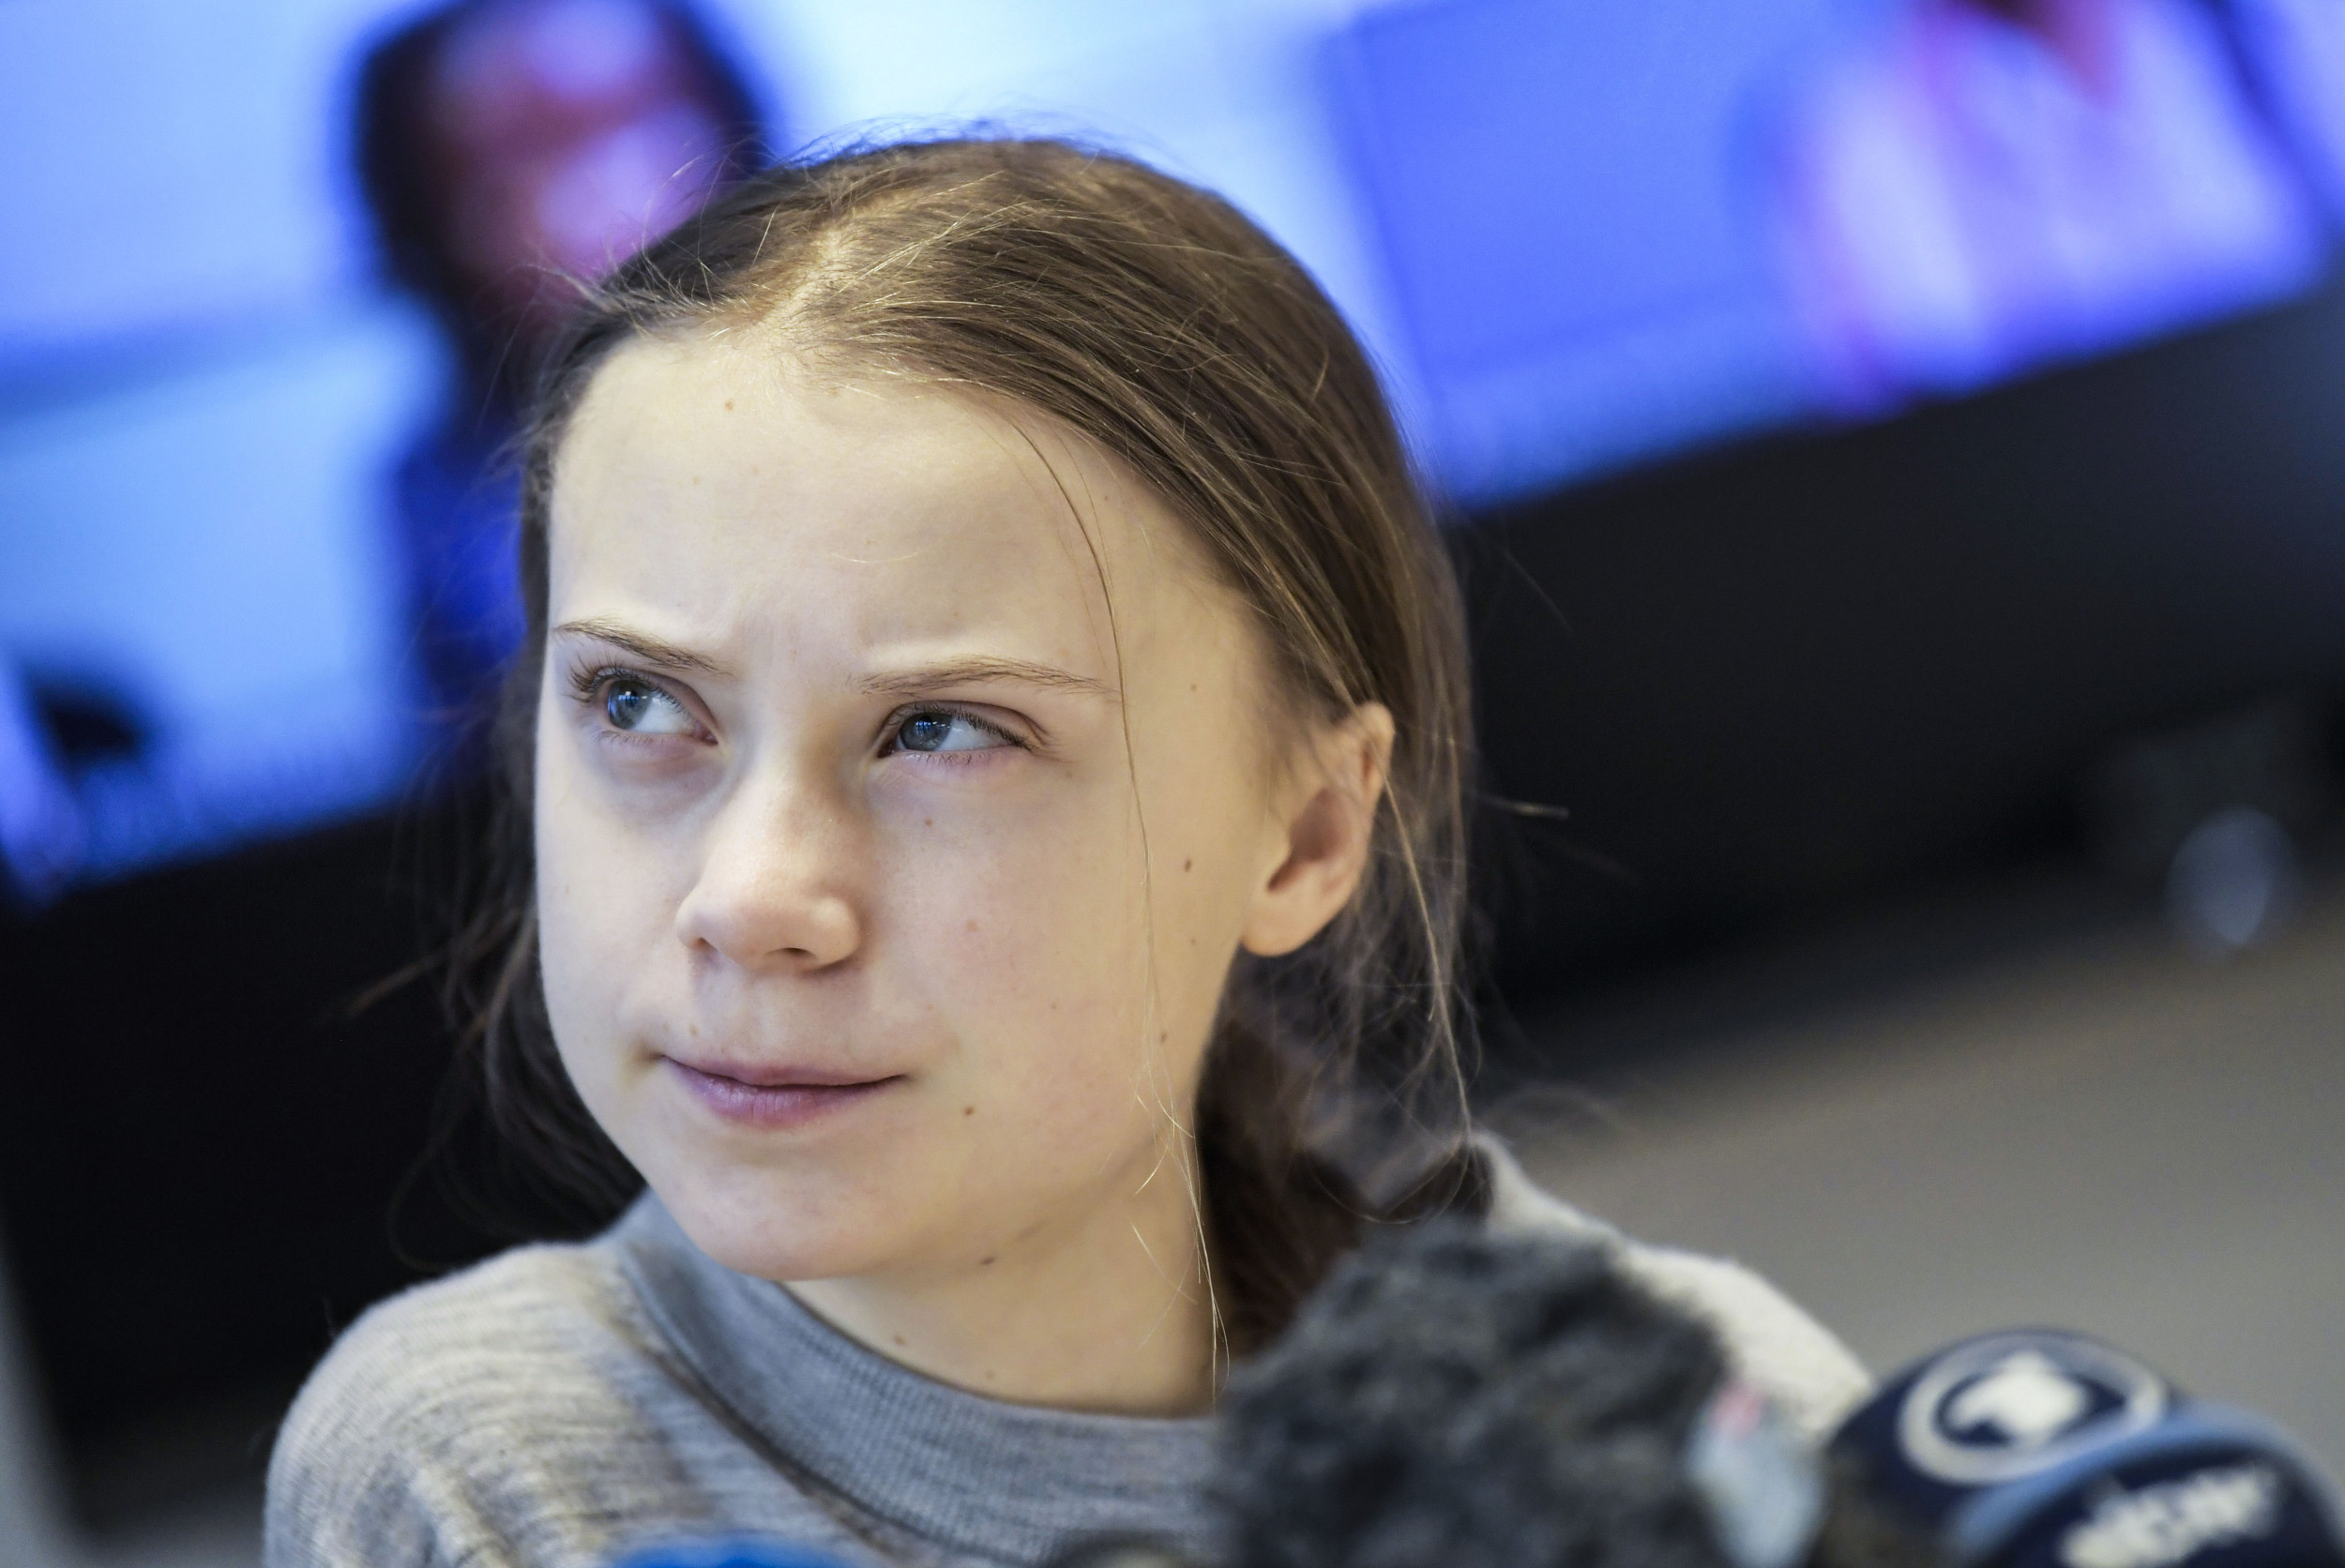 Canadian Oil Company Apologizes and 'Accepts Full Responsibility' Over  Sexually Explicit Greta Thunberg Sticker